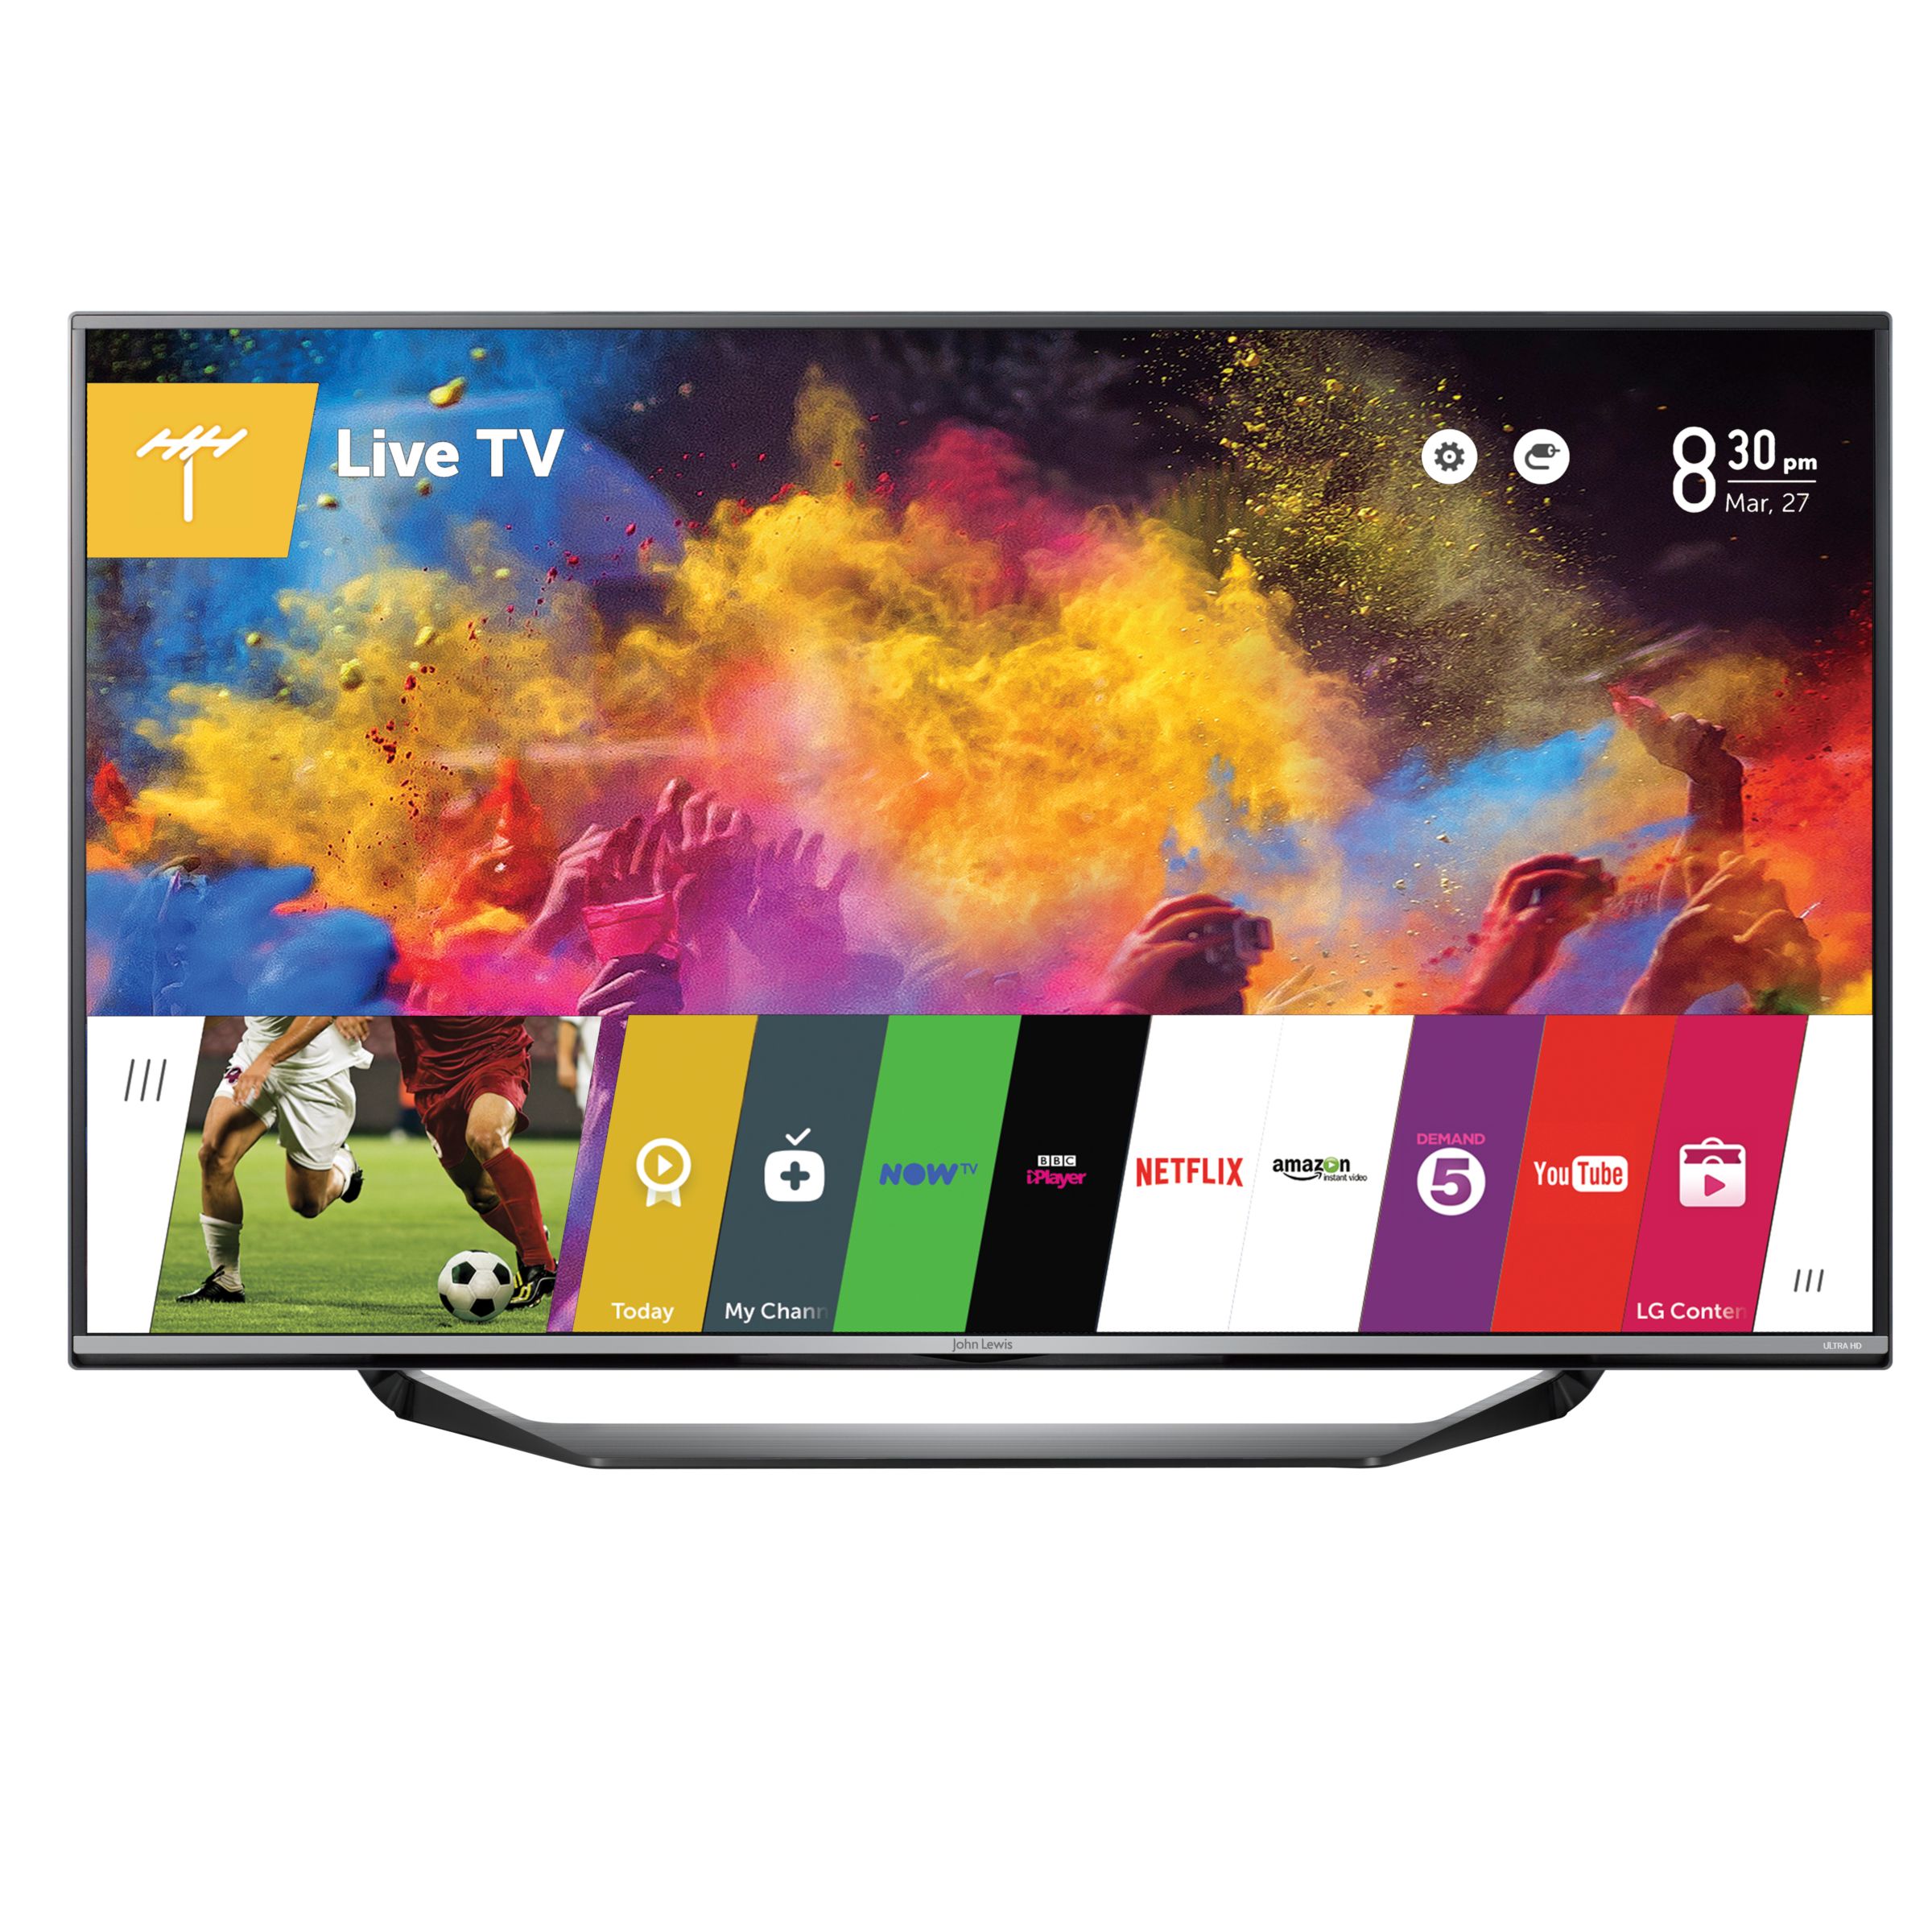 John Lewis 55JL9100 LED 4K Ultra-HD Smart TV, 55" with Freeview HD and Built-In Wi-Fi